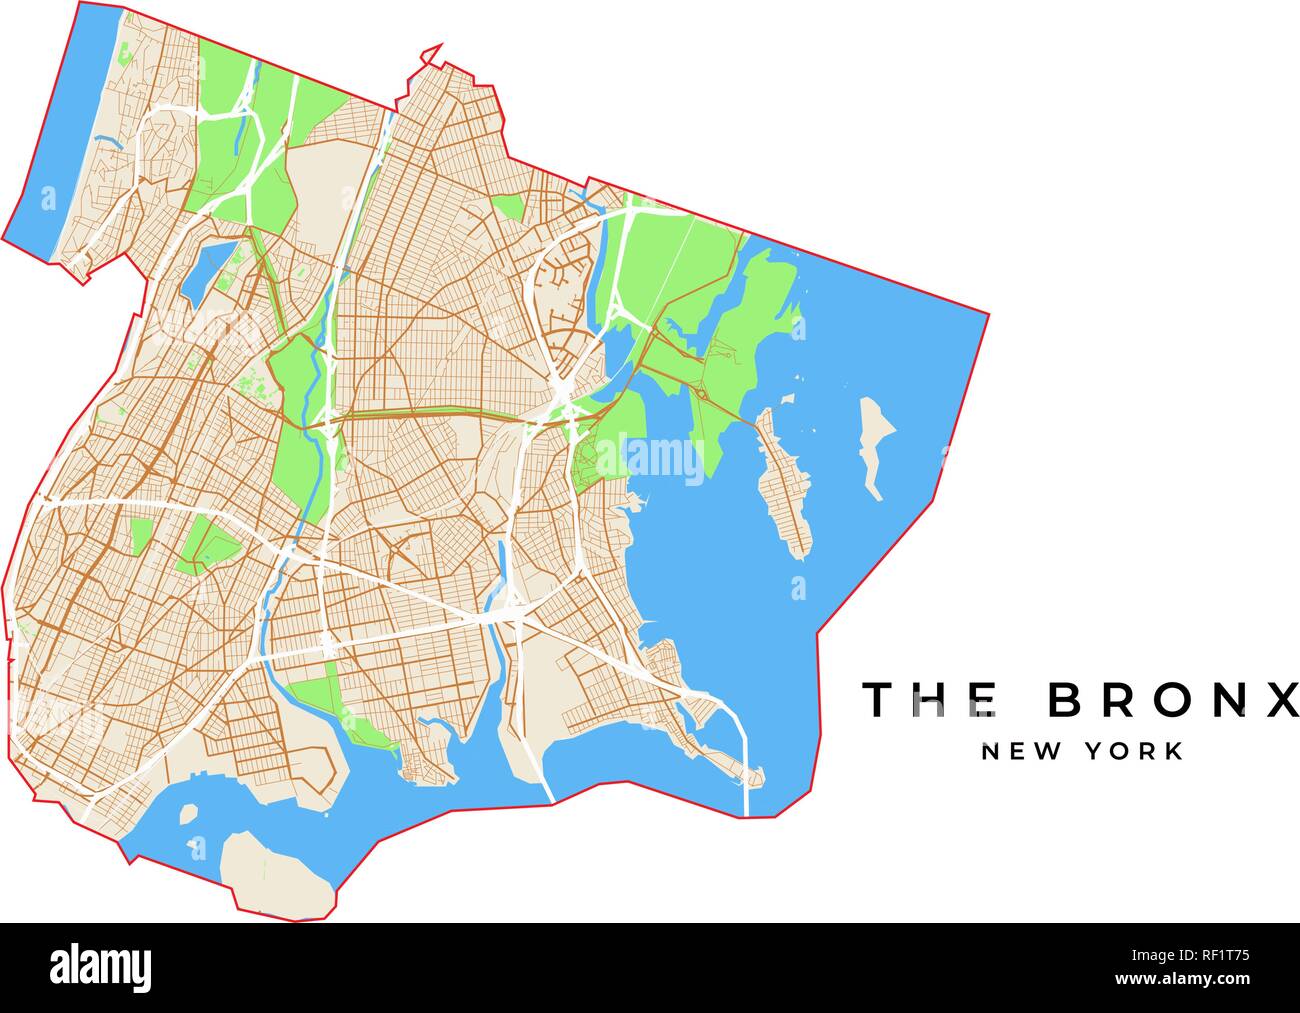 Vector Map Of The Bronx New York Usa Various Colors For Streets